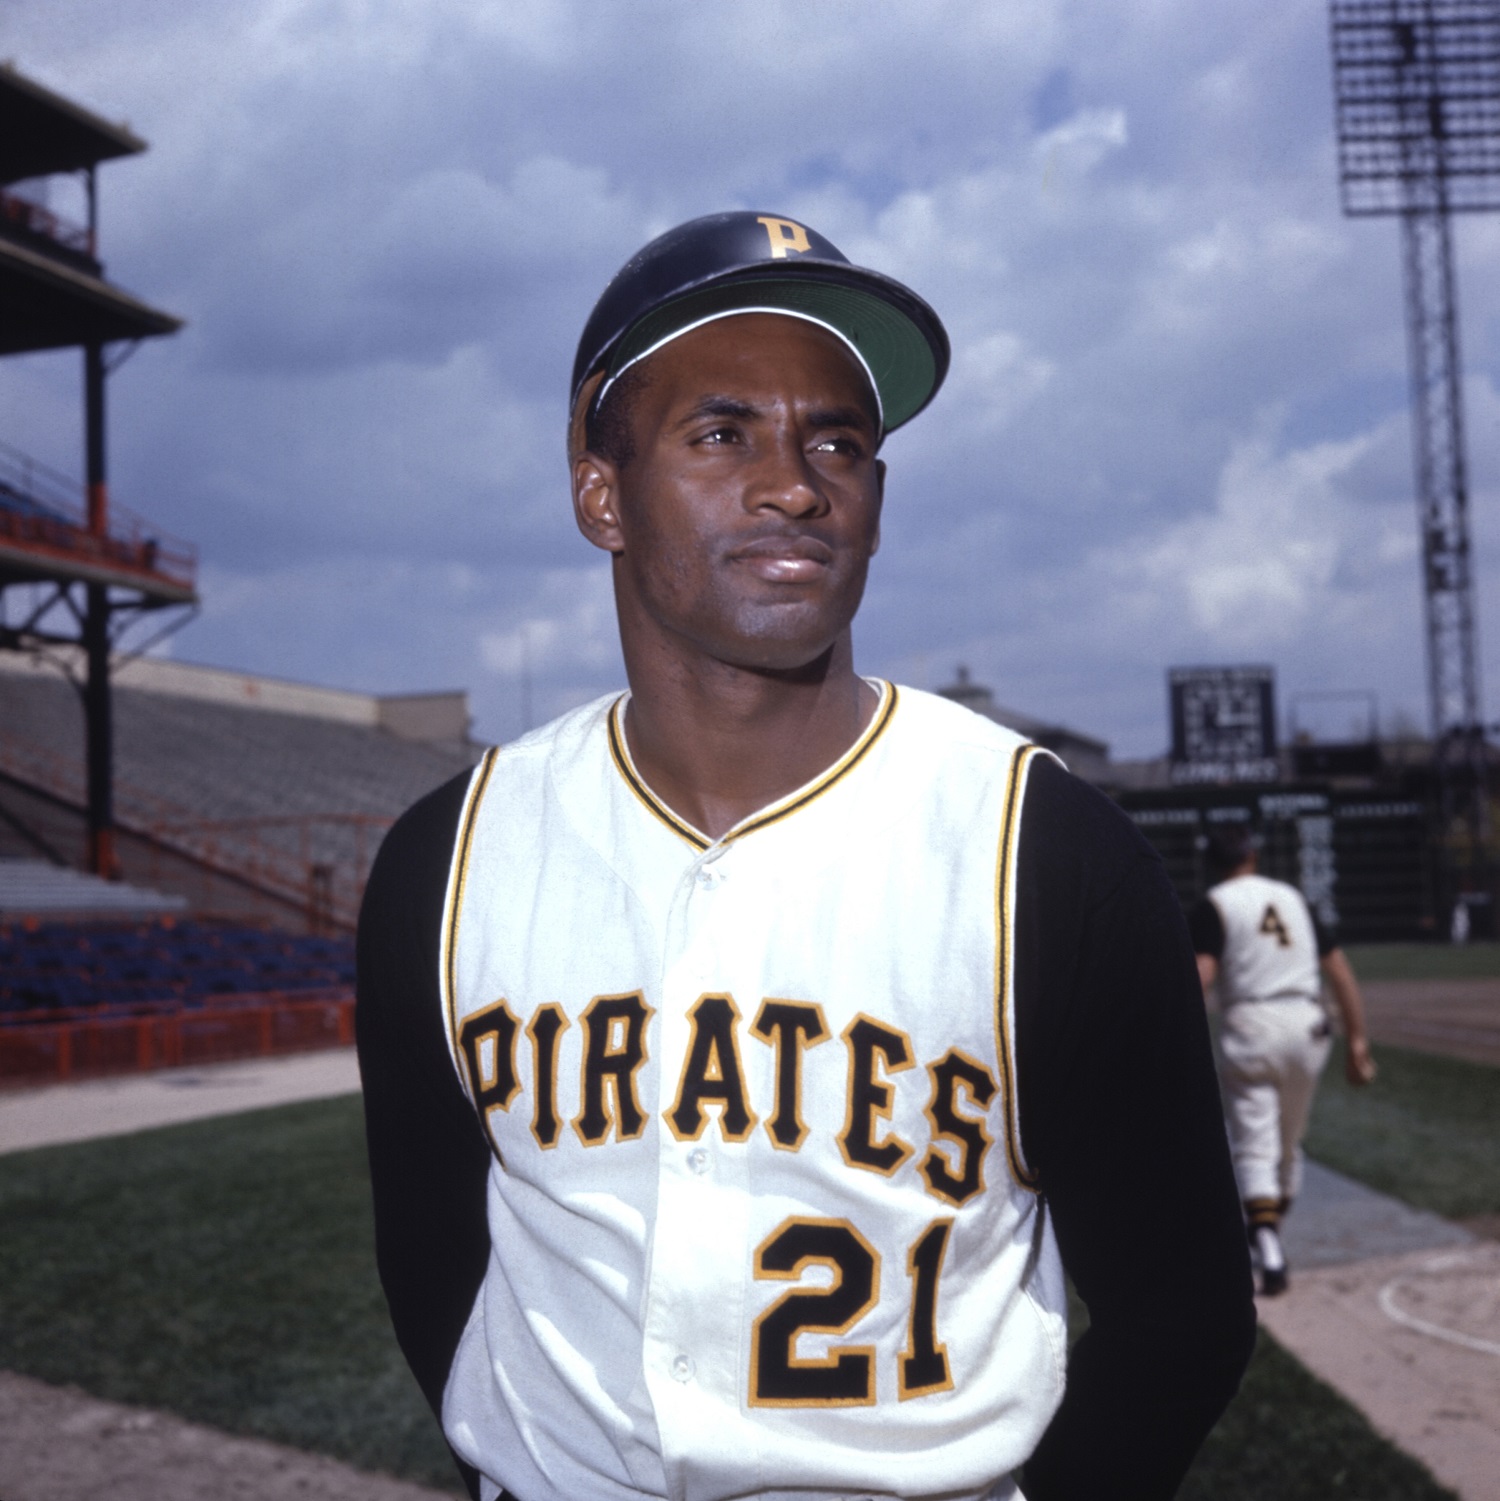 On April 6, 1973, we retired Roberto - Pittsburgh Pirates